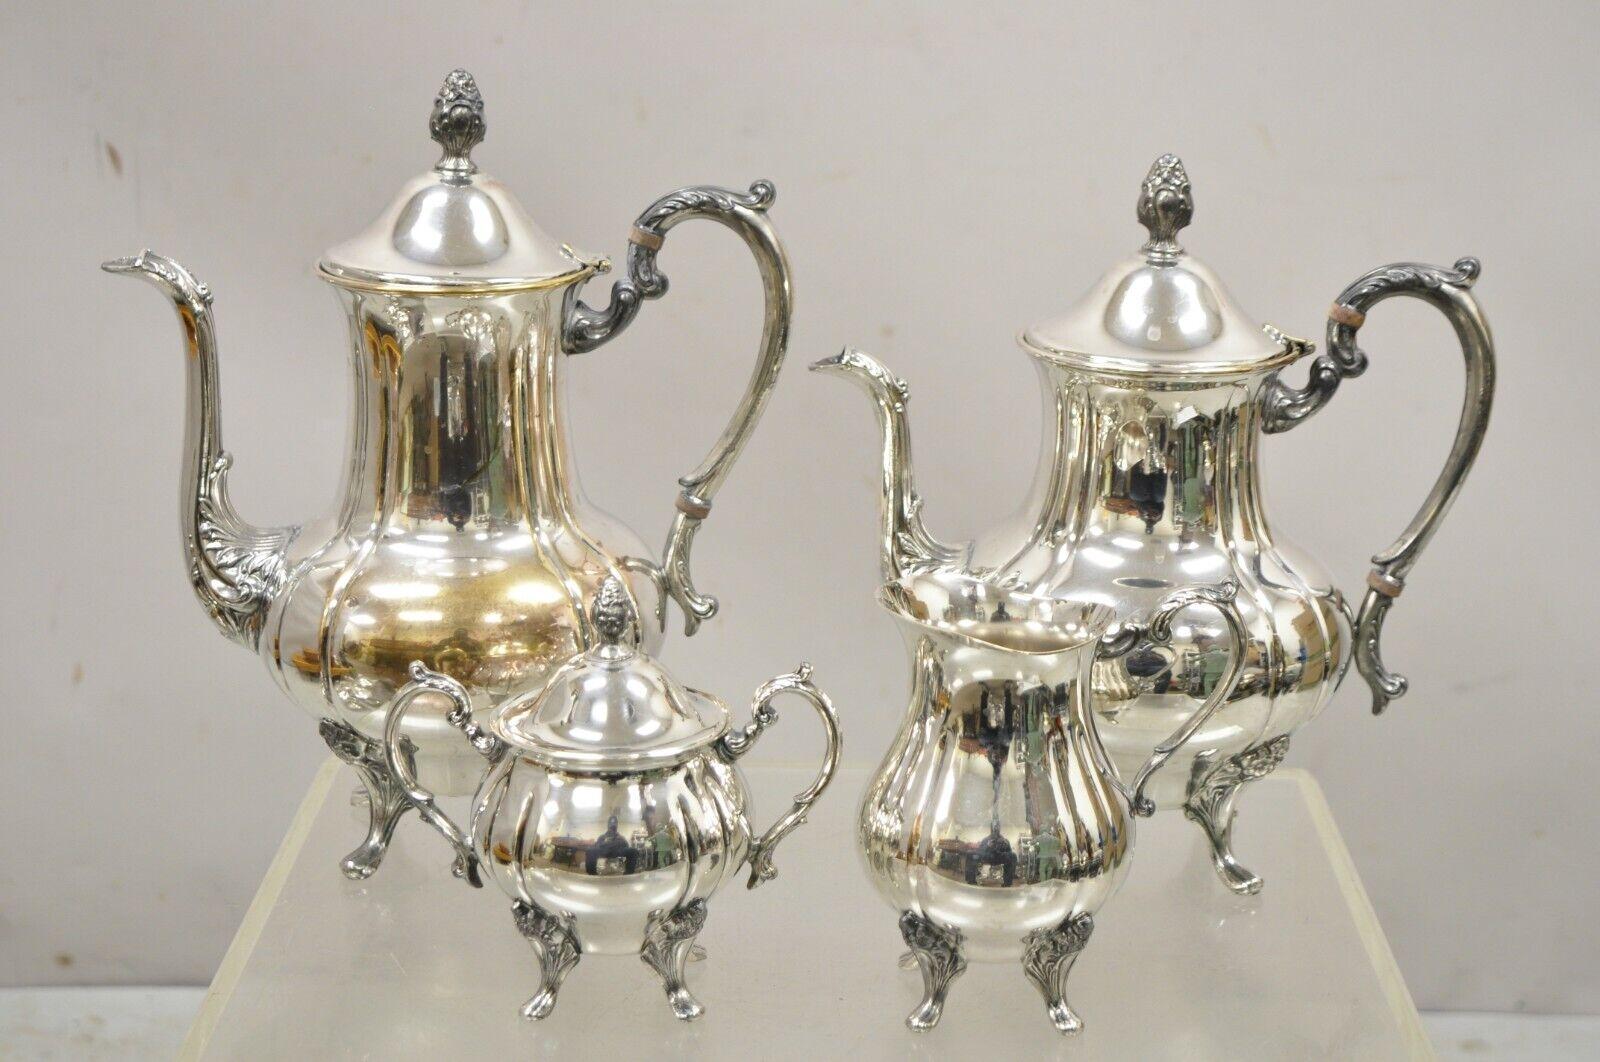 Antique English Victorian Silver Plated Coffee Tea Set - 4 Pc Set. Item features (1) coffee pot, (1) tea pot, (1) creamer, and (1) lidded sugar bowl. Circa Early to Mid 1900s. Measurements: Tallest piece: 11.5